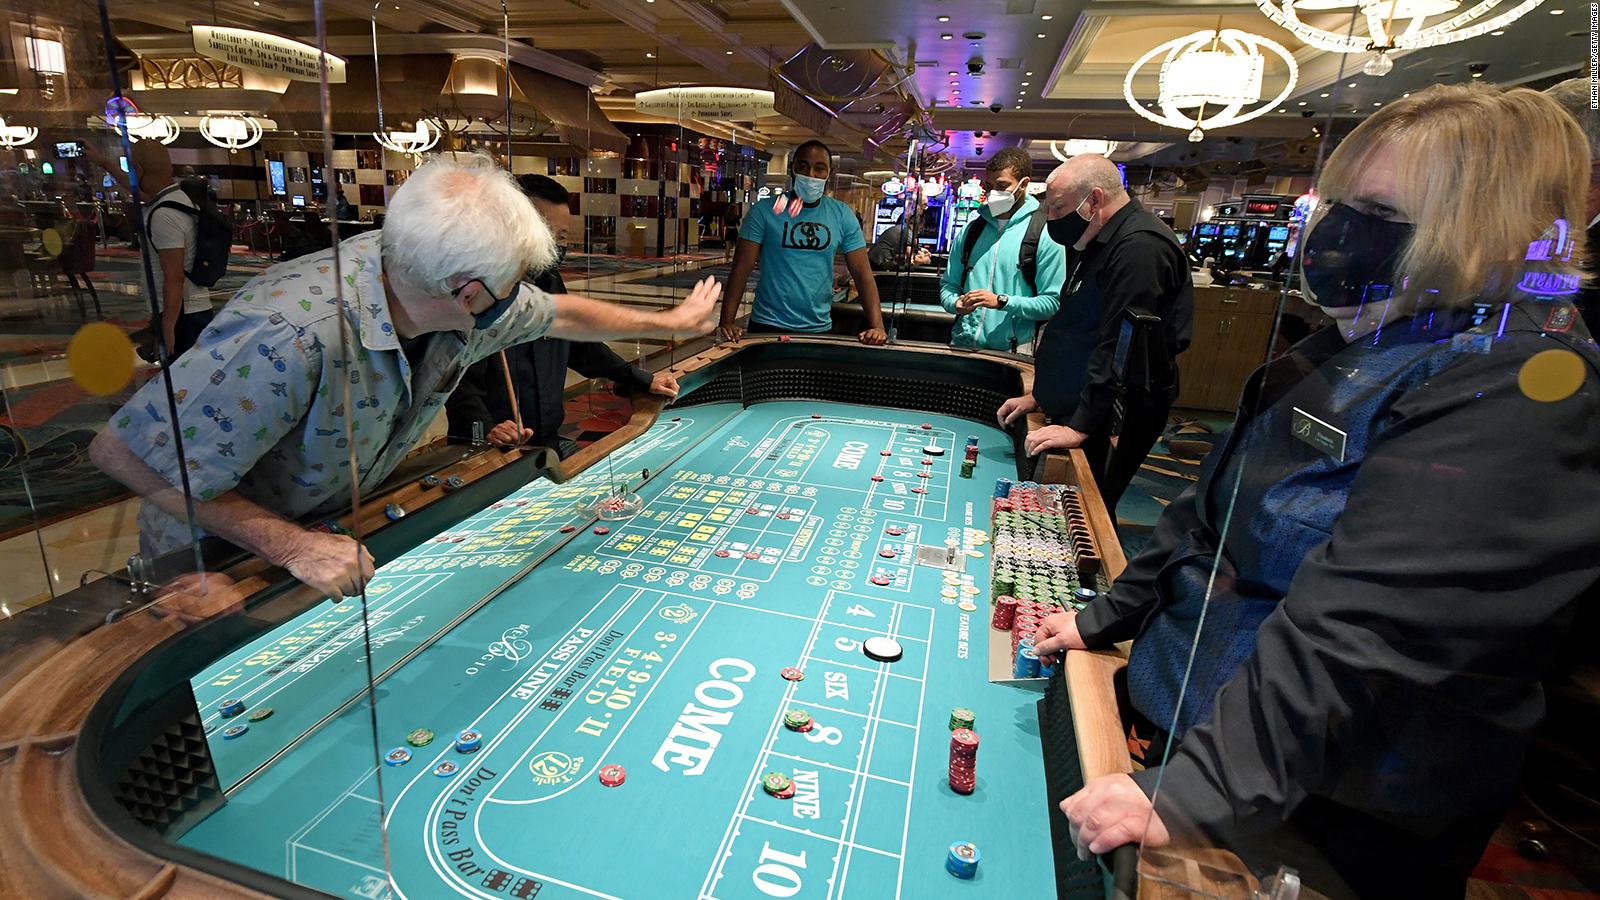 Las Vegas is (Almost) Fully Reopened: A Look Inside the Casinos Post-Pandemic